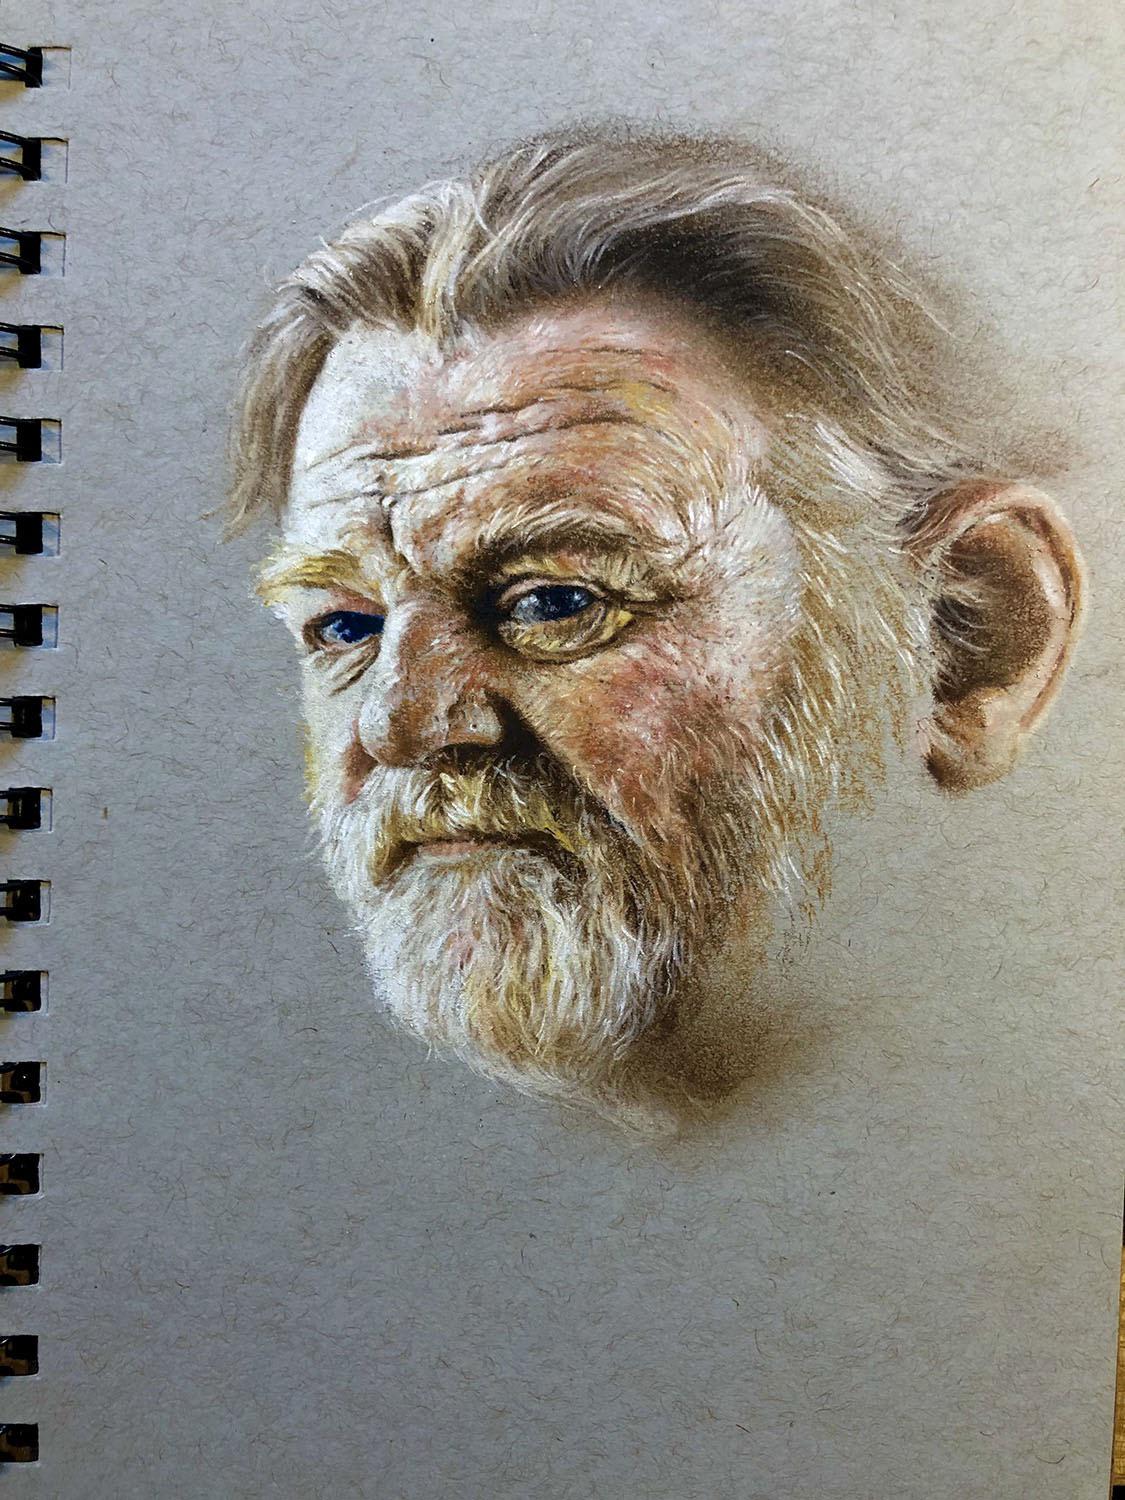 I tried to use pastel for portrait today. It was surprisingly easy to work with compared to wax/oil pencil. A perfect balance between paint and dry medium.